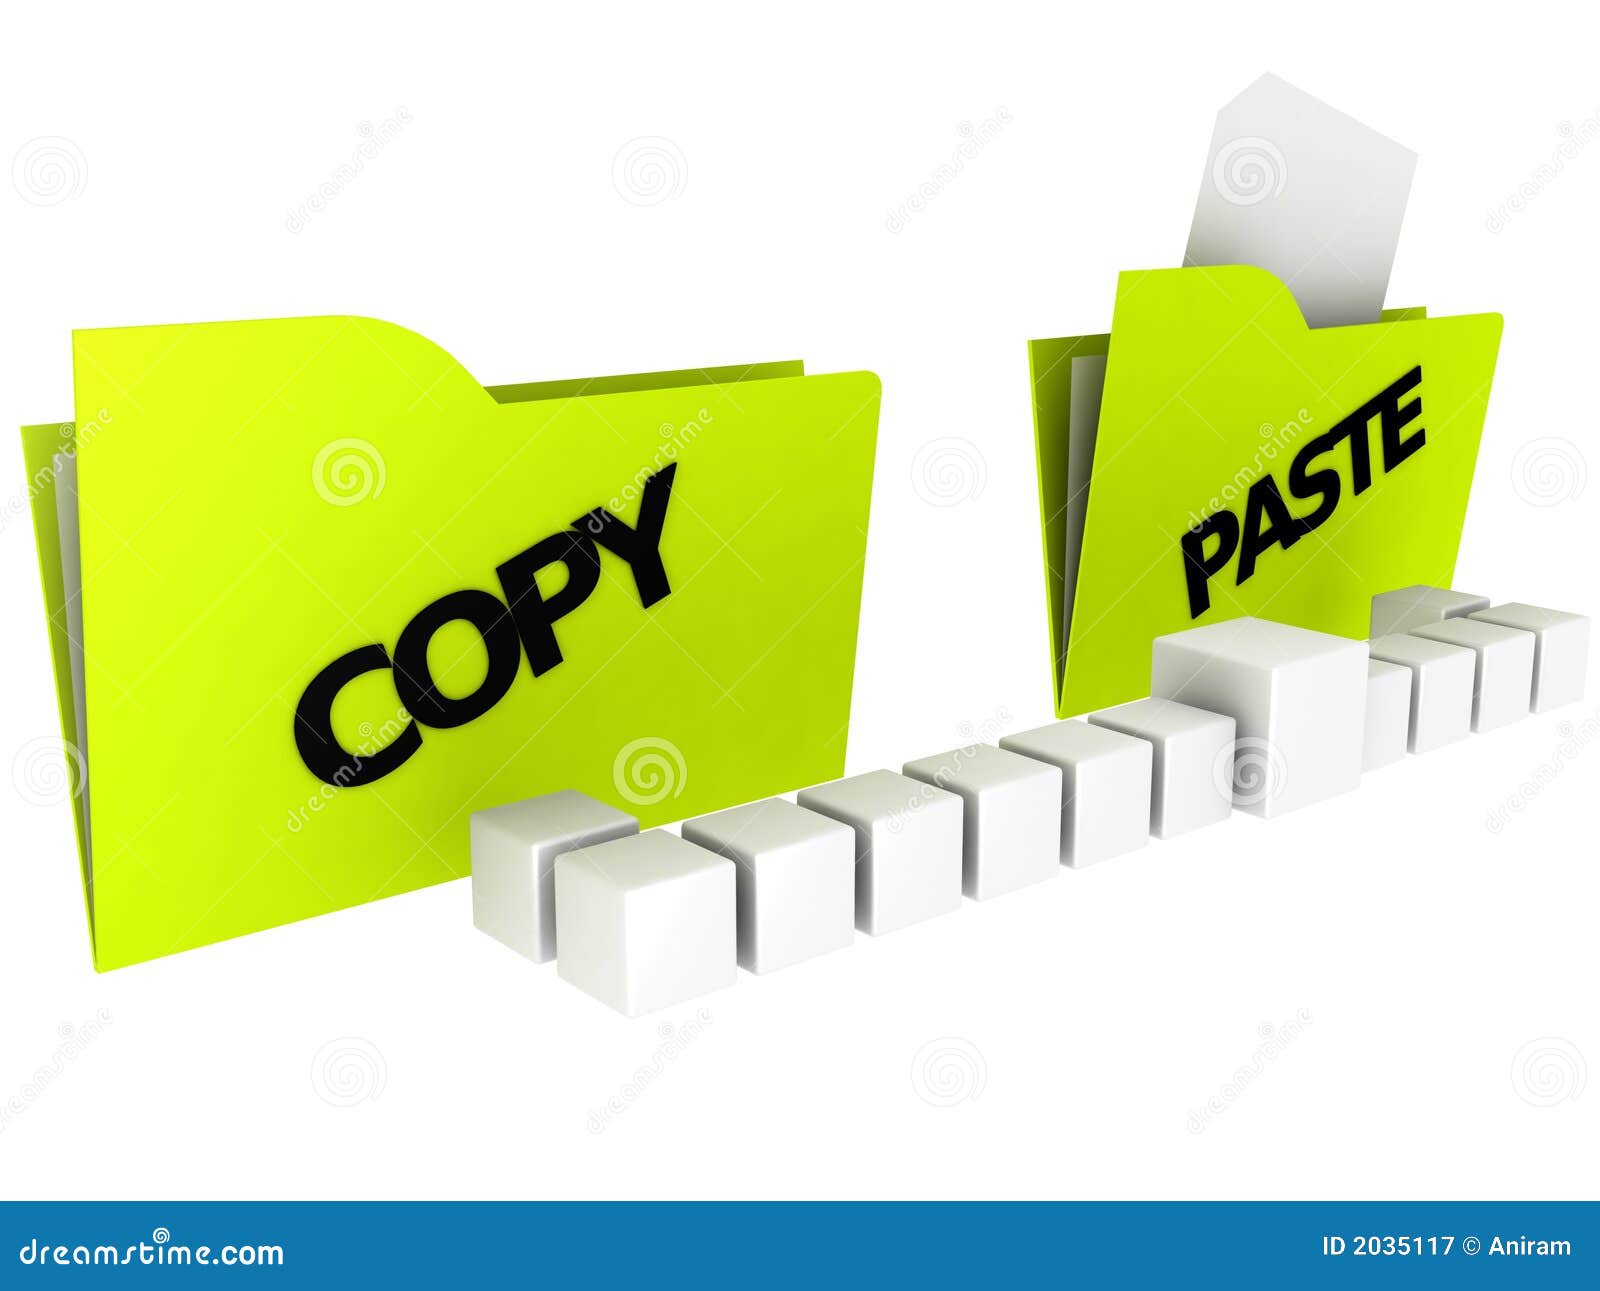 free clipart images to copy and paste - photo #45